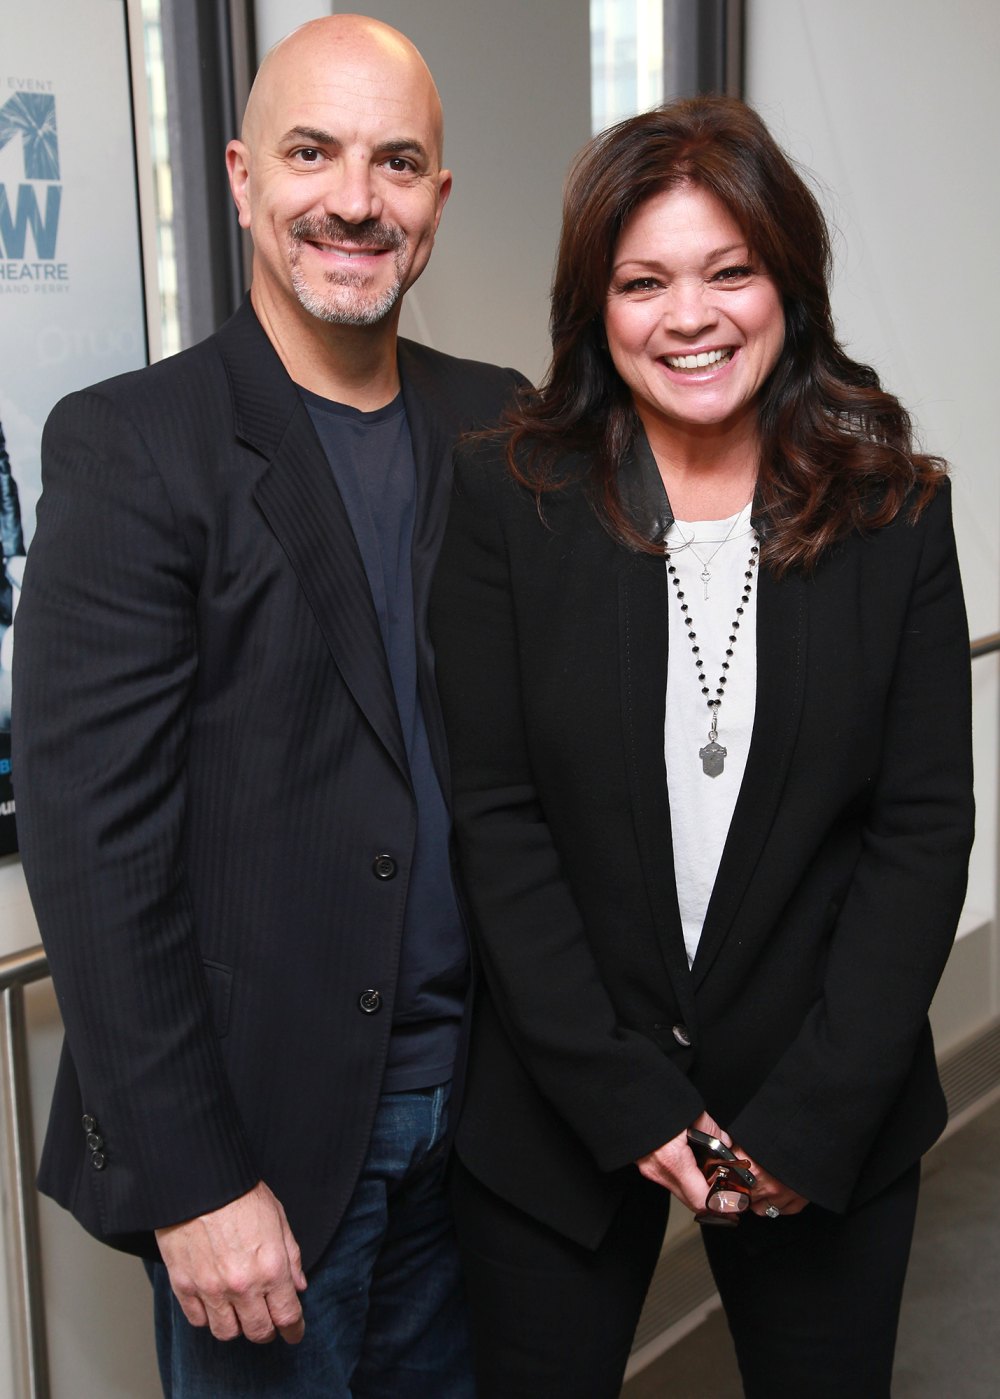 Valerie Bertinelli reveals she is dating a 'special' man after splitting in 2022